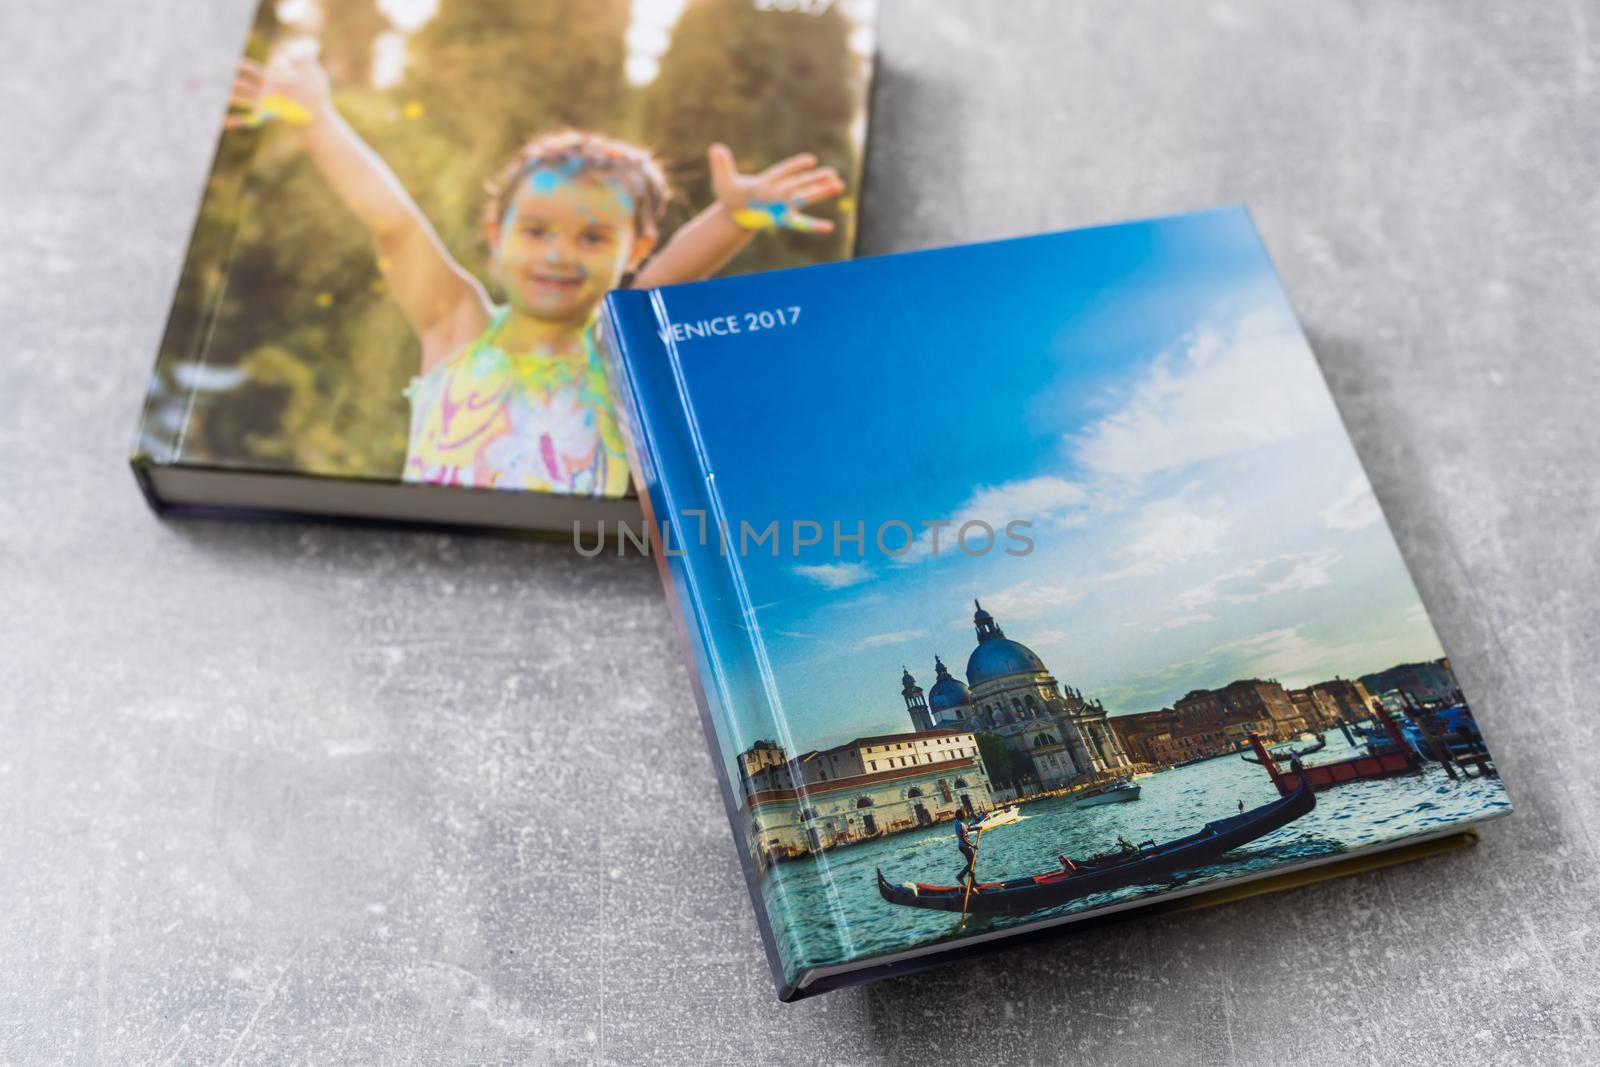 Photobook Album with Travel Photo on Table by Andelov13